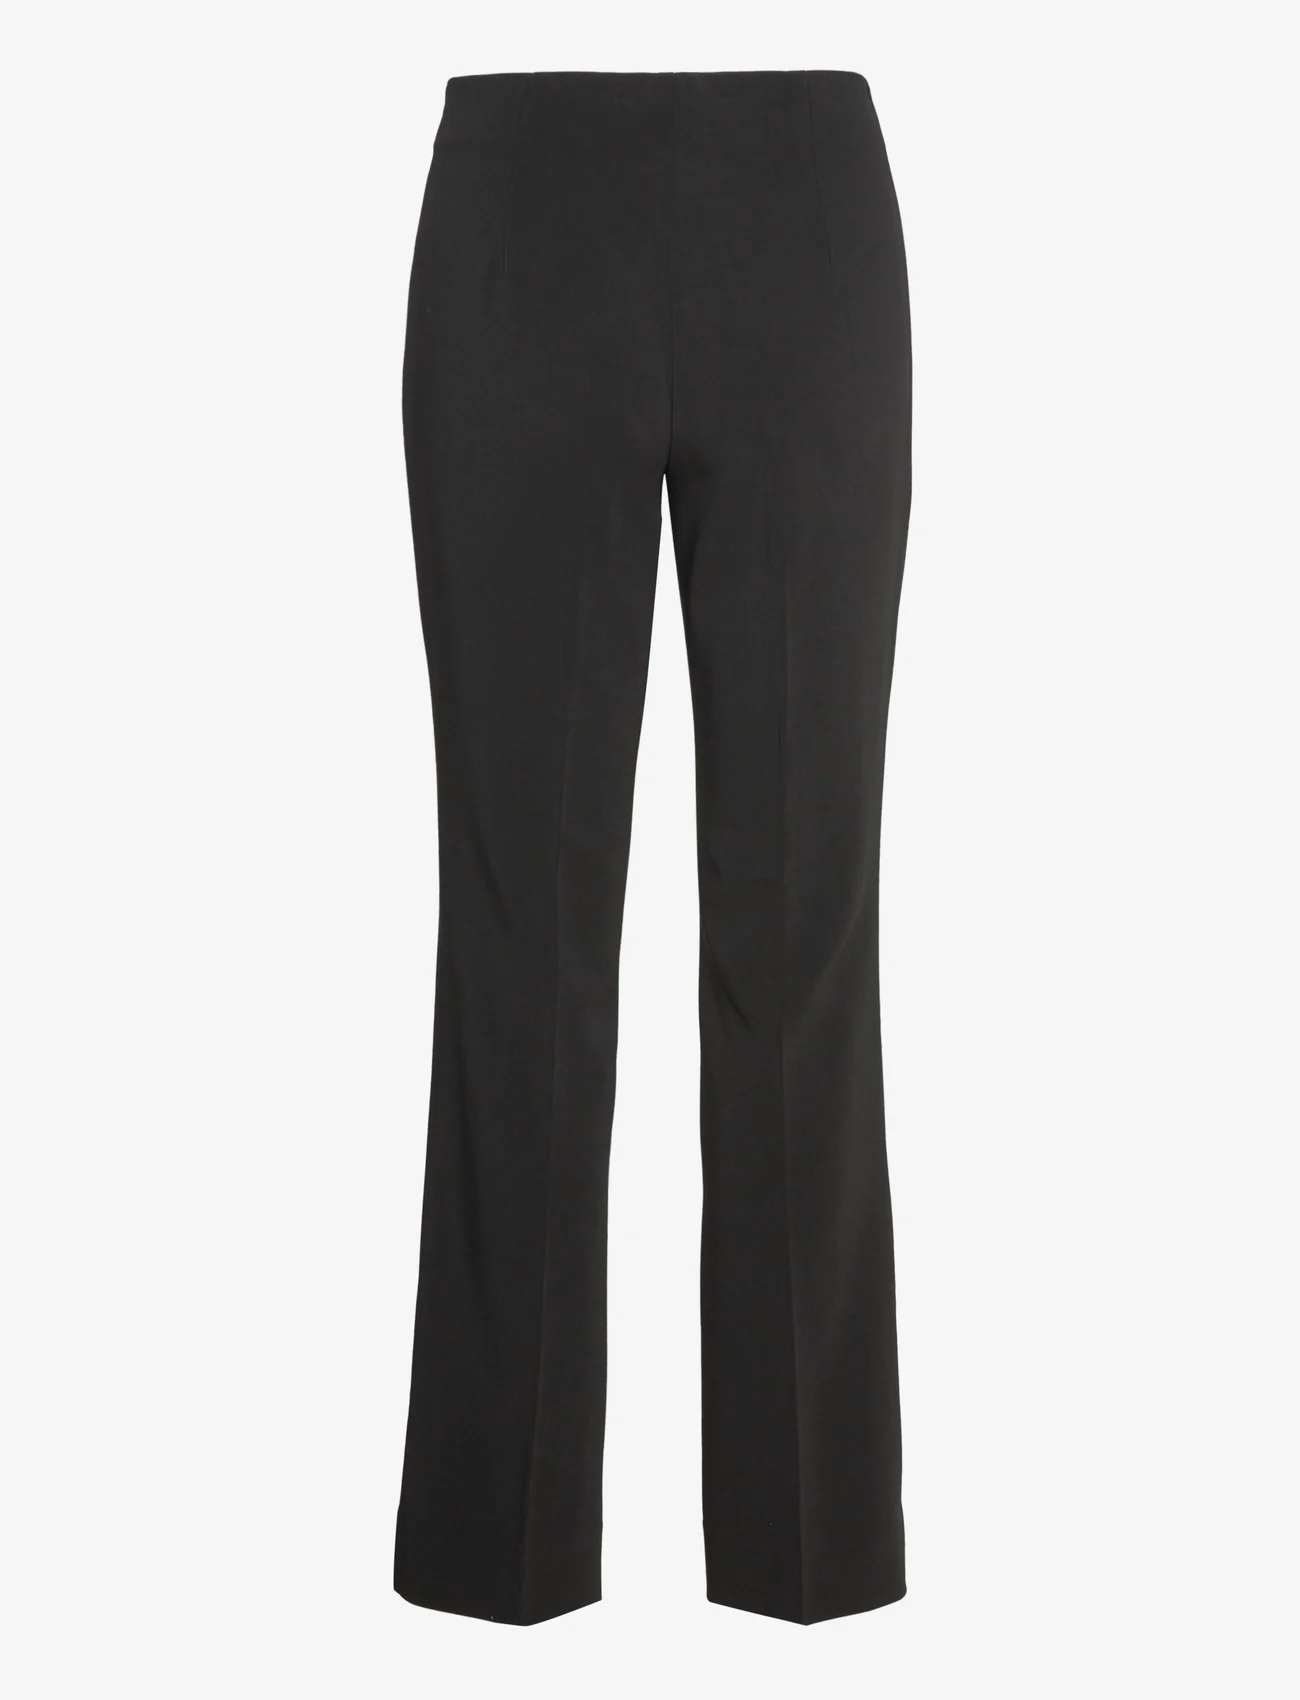 Bruuns Bazaar - BrassicaBBLyas pants - tailored trousers - black - 1